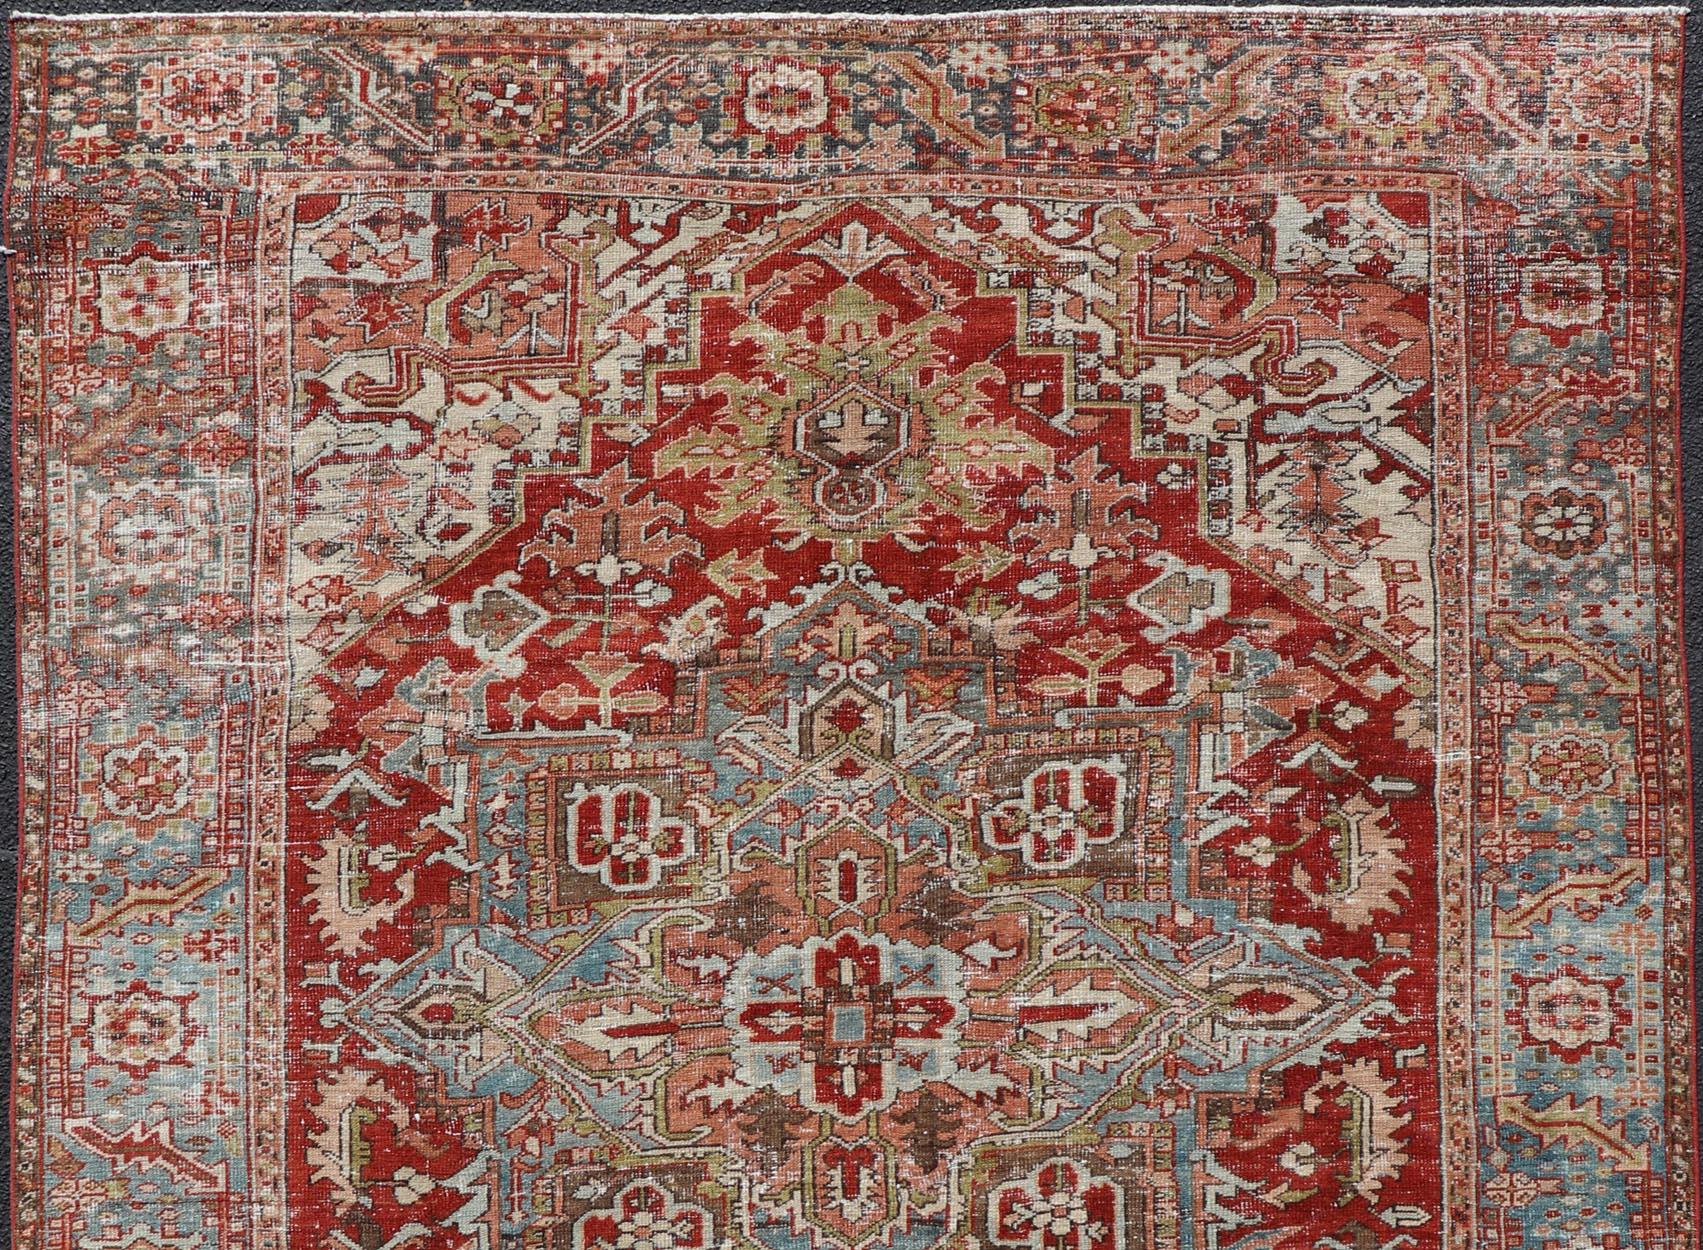 Antique Persian Heriz Rug With Geometric Medallion Design in Red & Soft Colors In Good Condition For Sale In Atlanta, GA